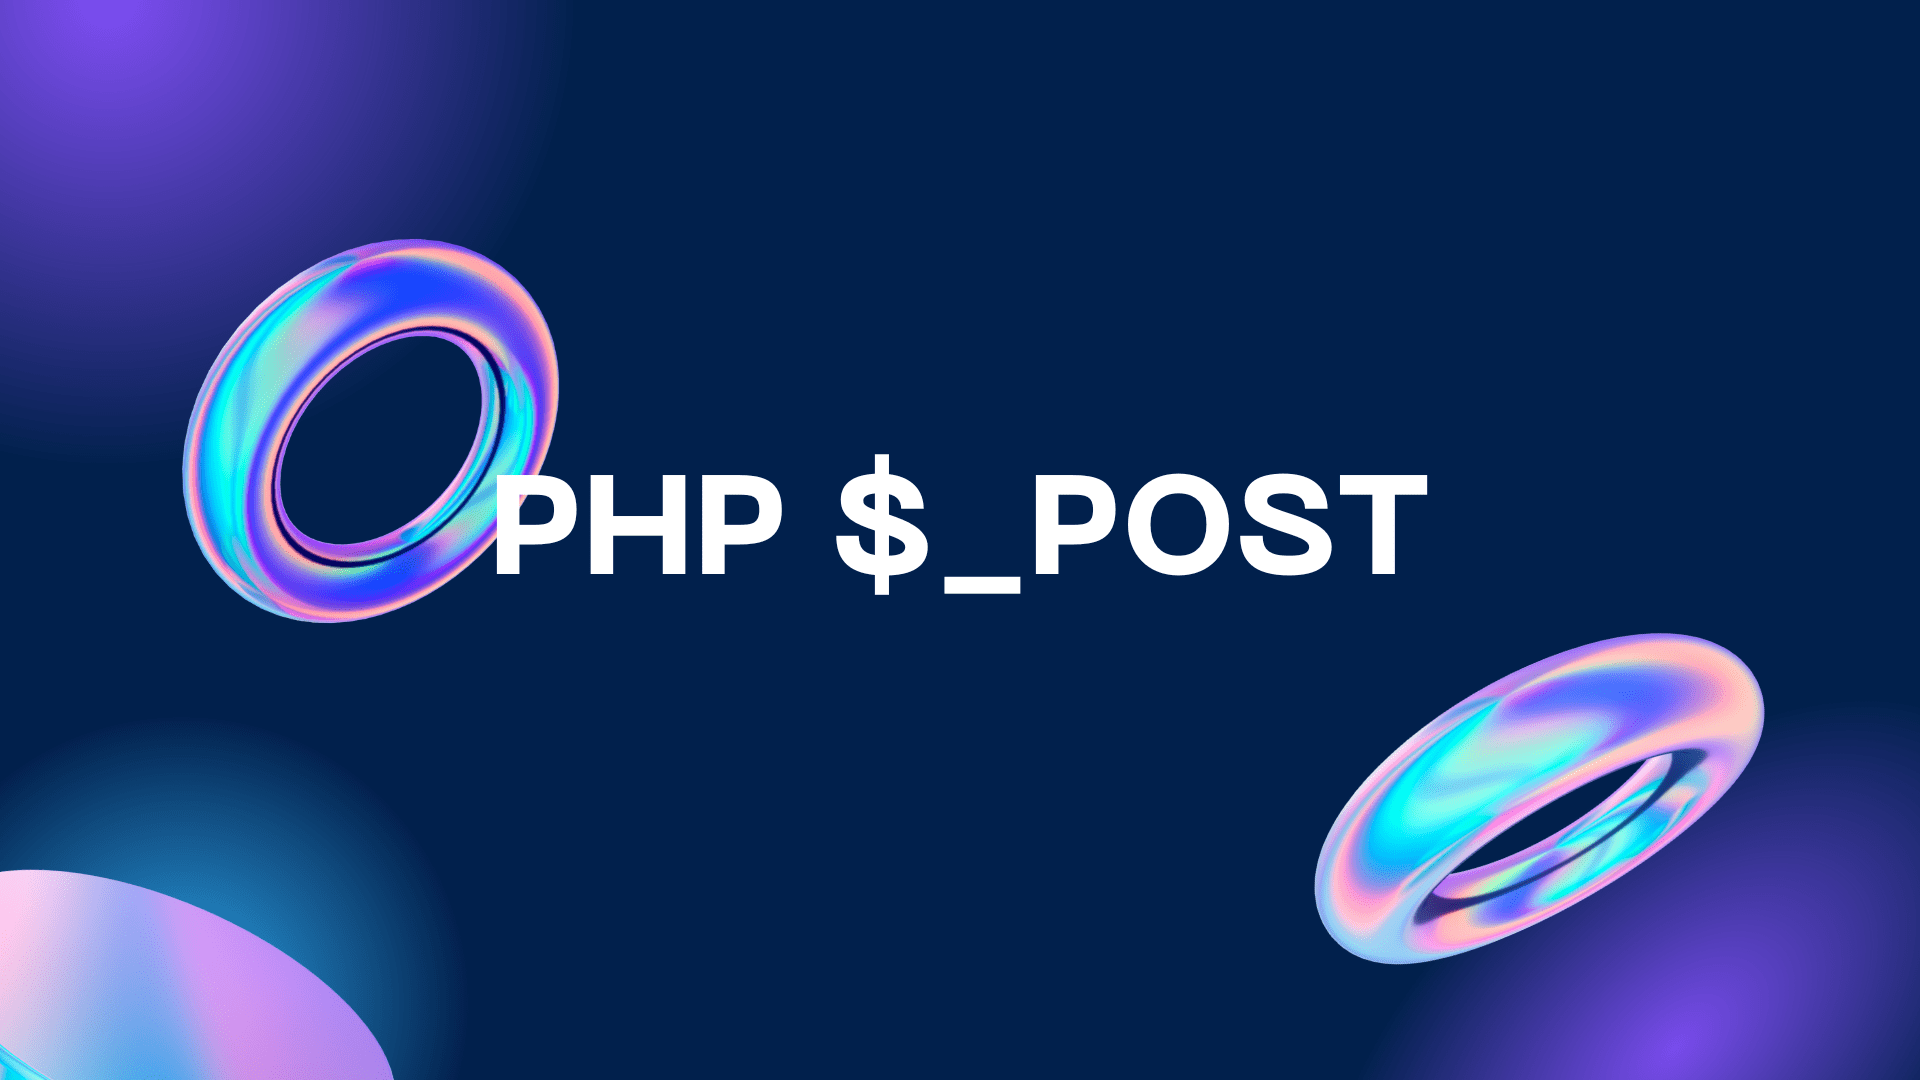 PHP $_POST